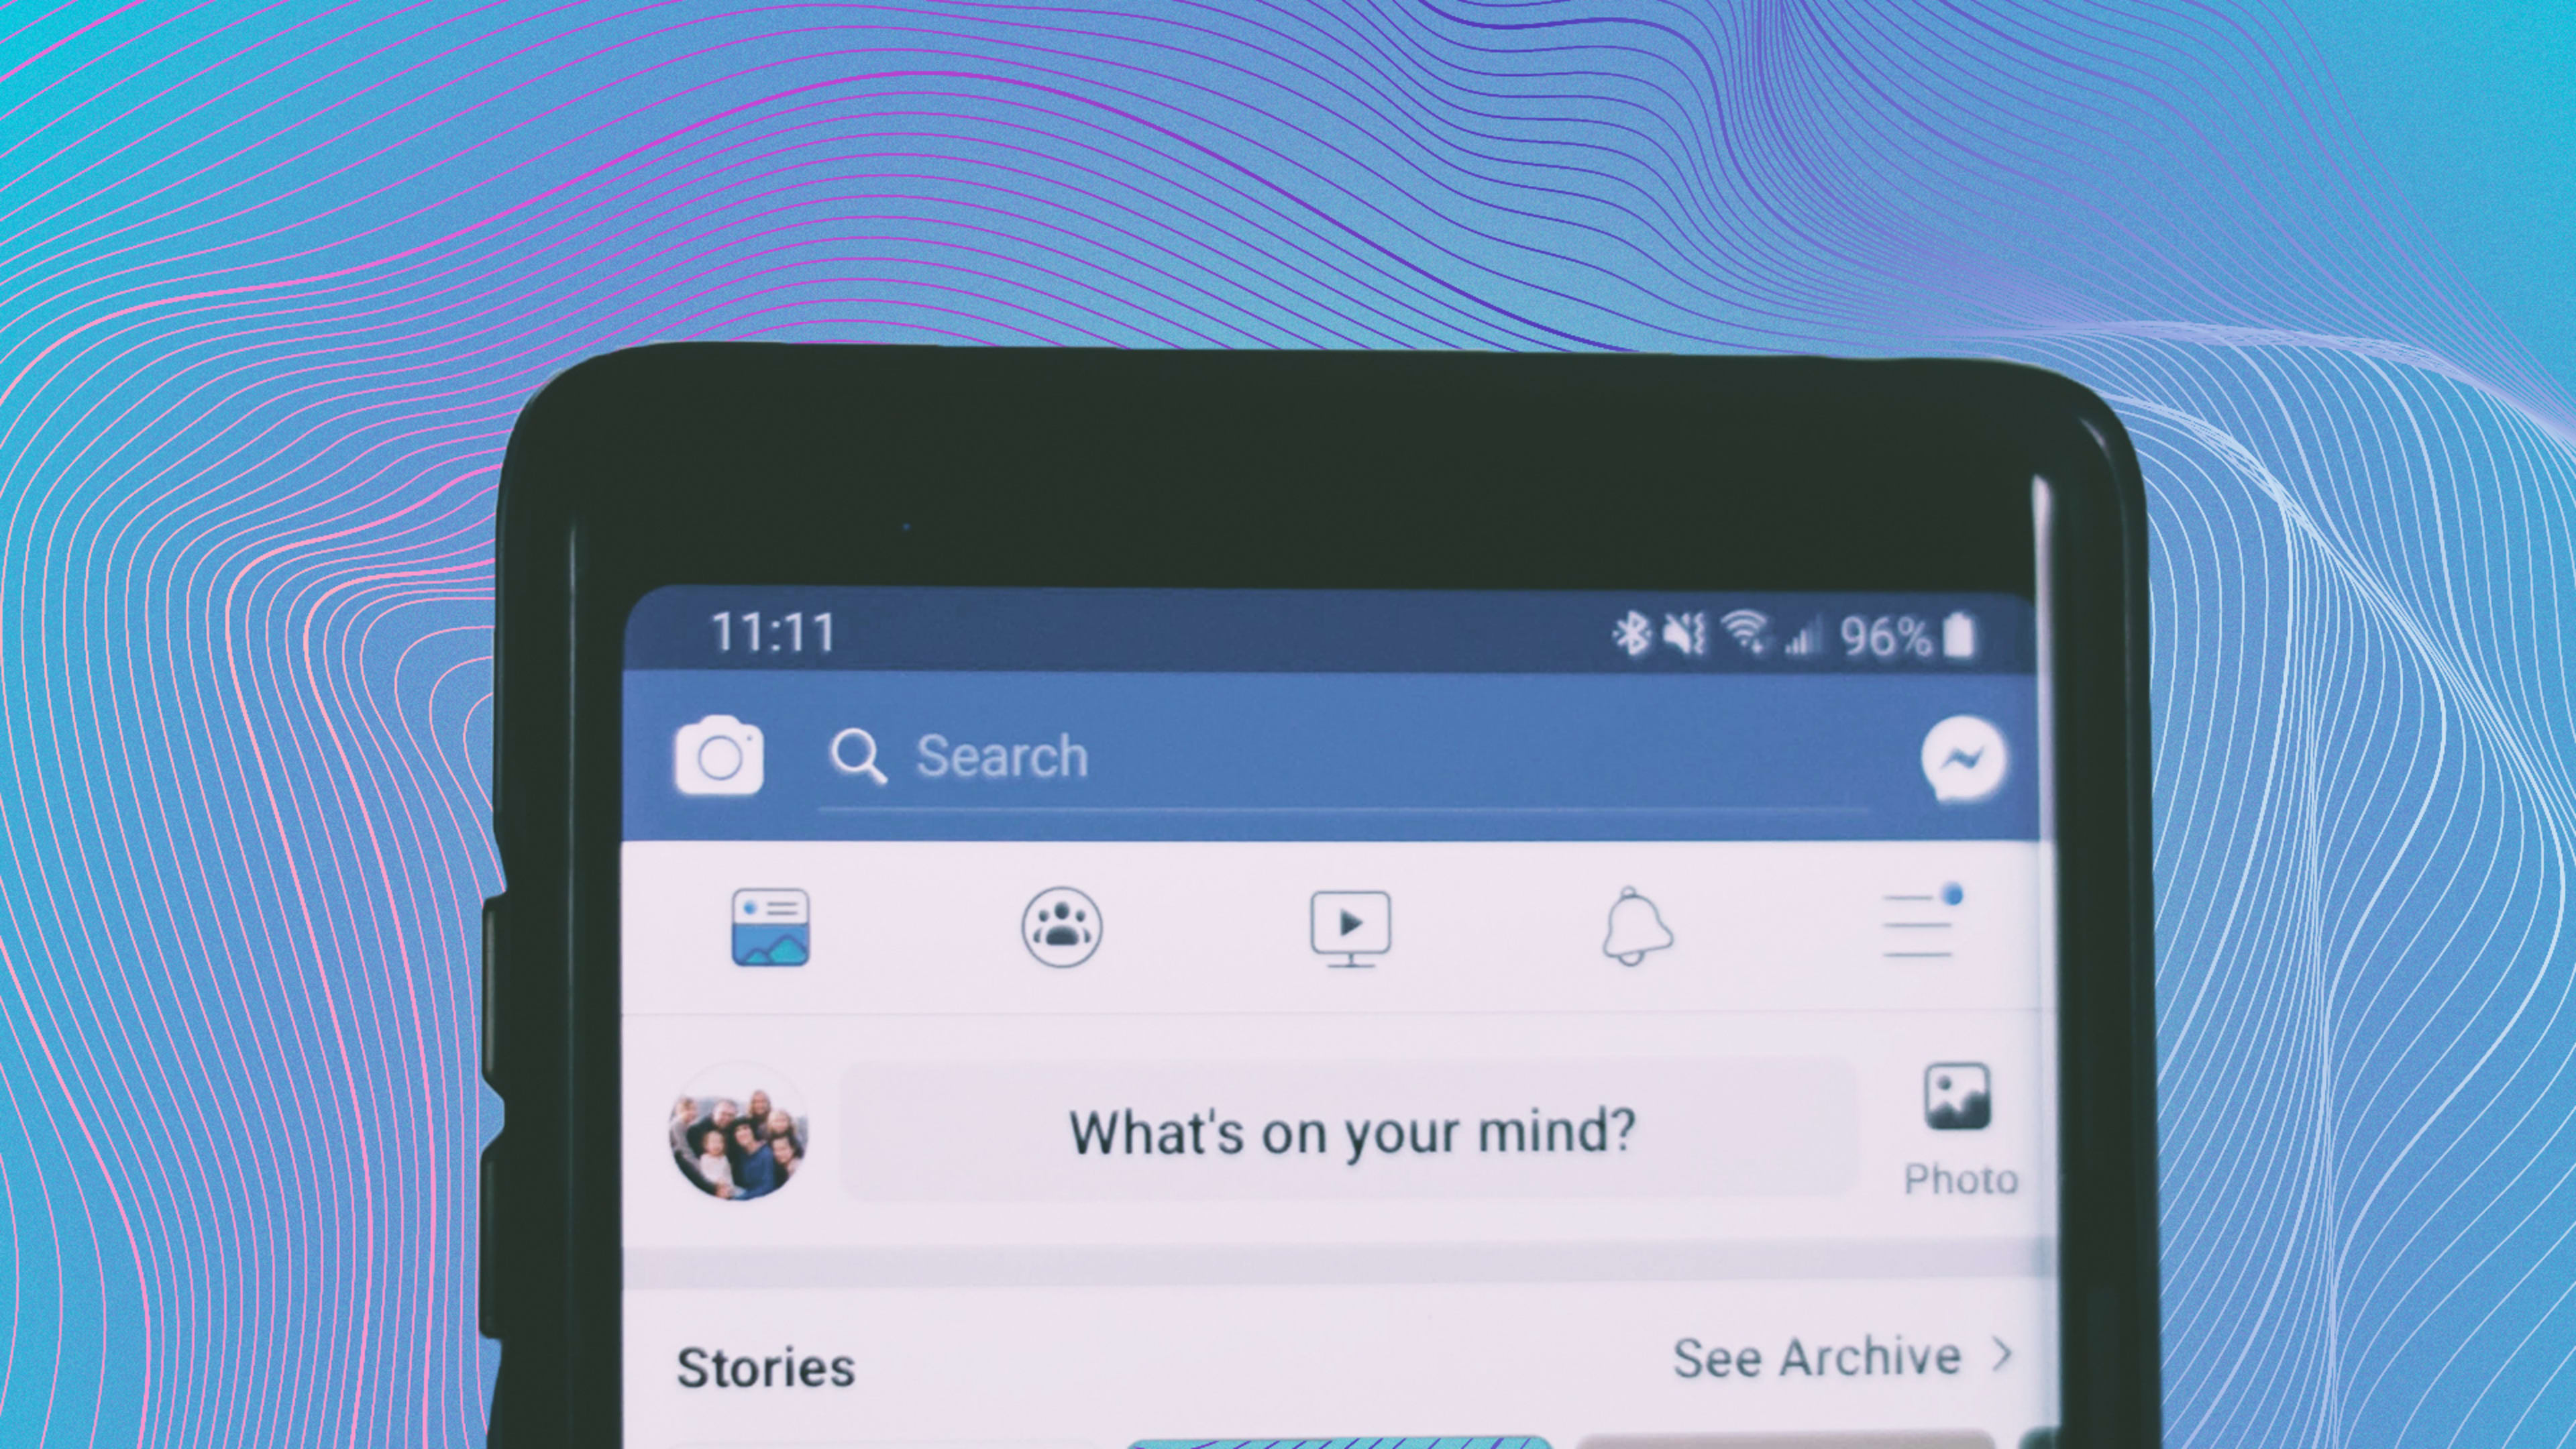 Facebook ‘Update to Our Terms’ October 2020: Here’s what that weird message is all about